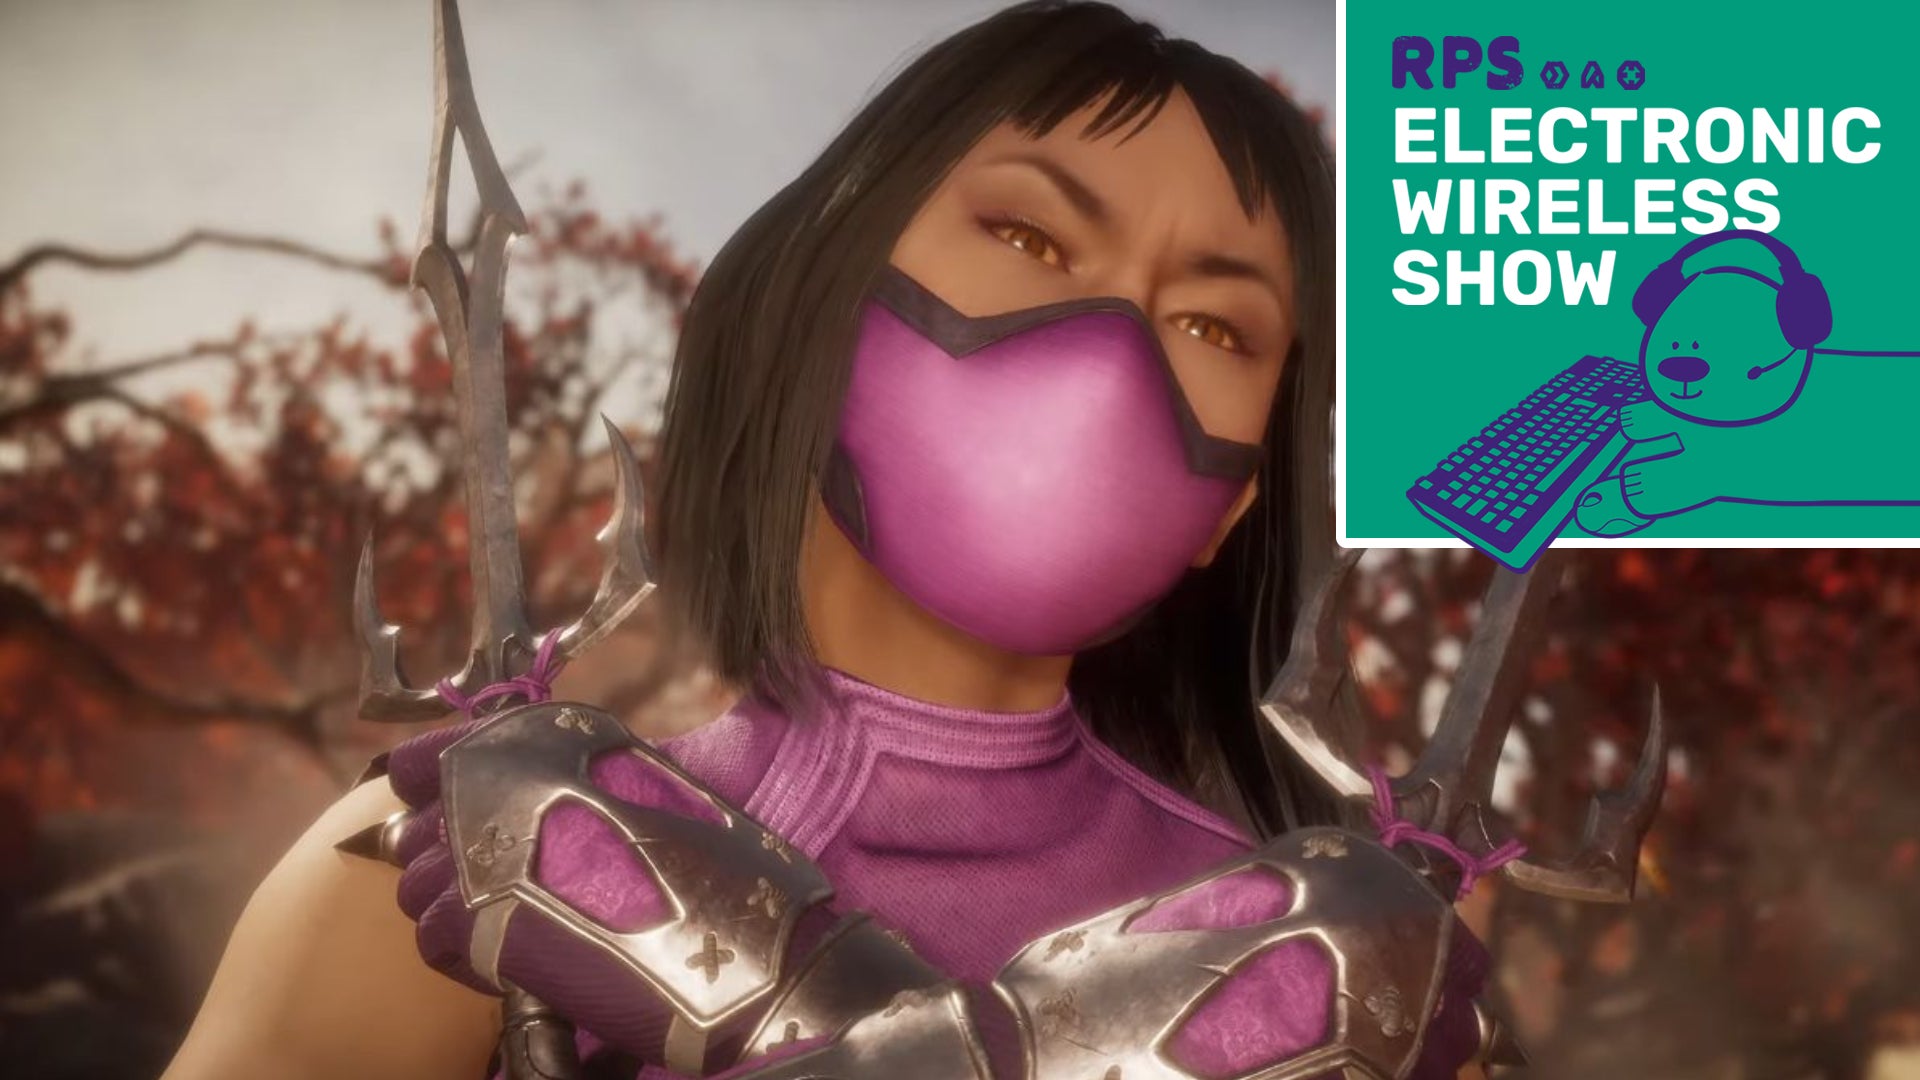 A headshot closeup of Mileena from Mortal Kombat, with the Electronic Wireless Show podcast logo in the top right corner of the image